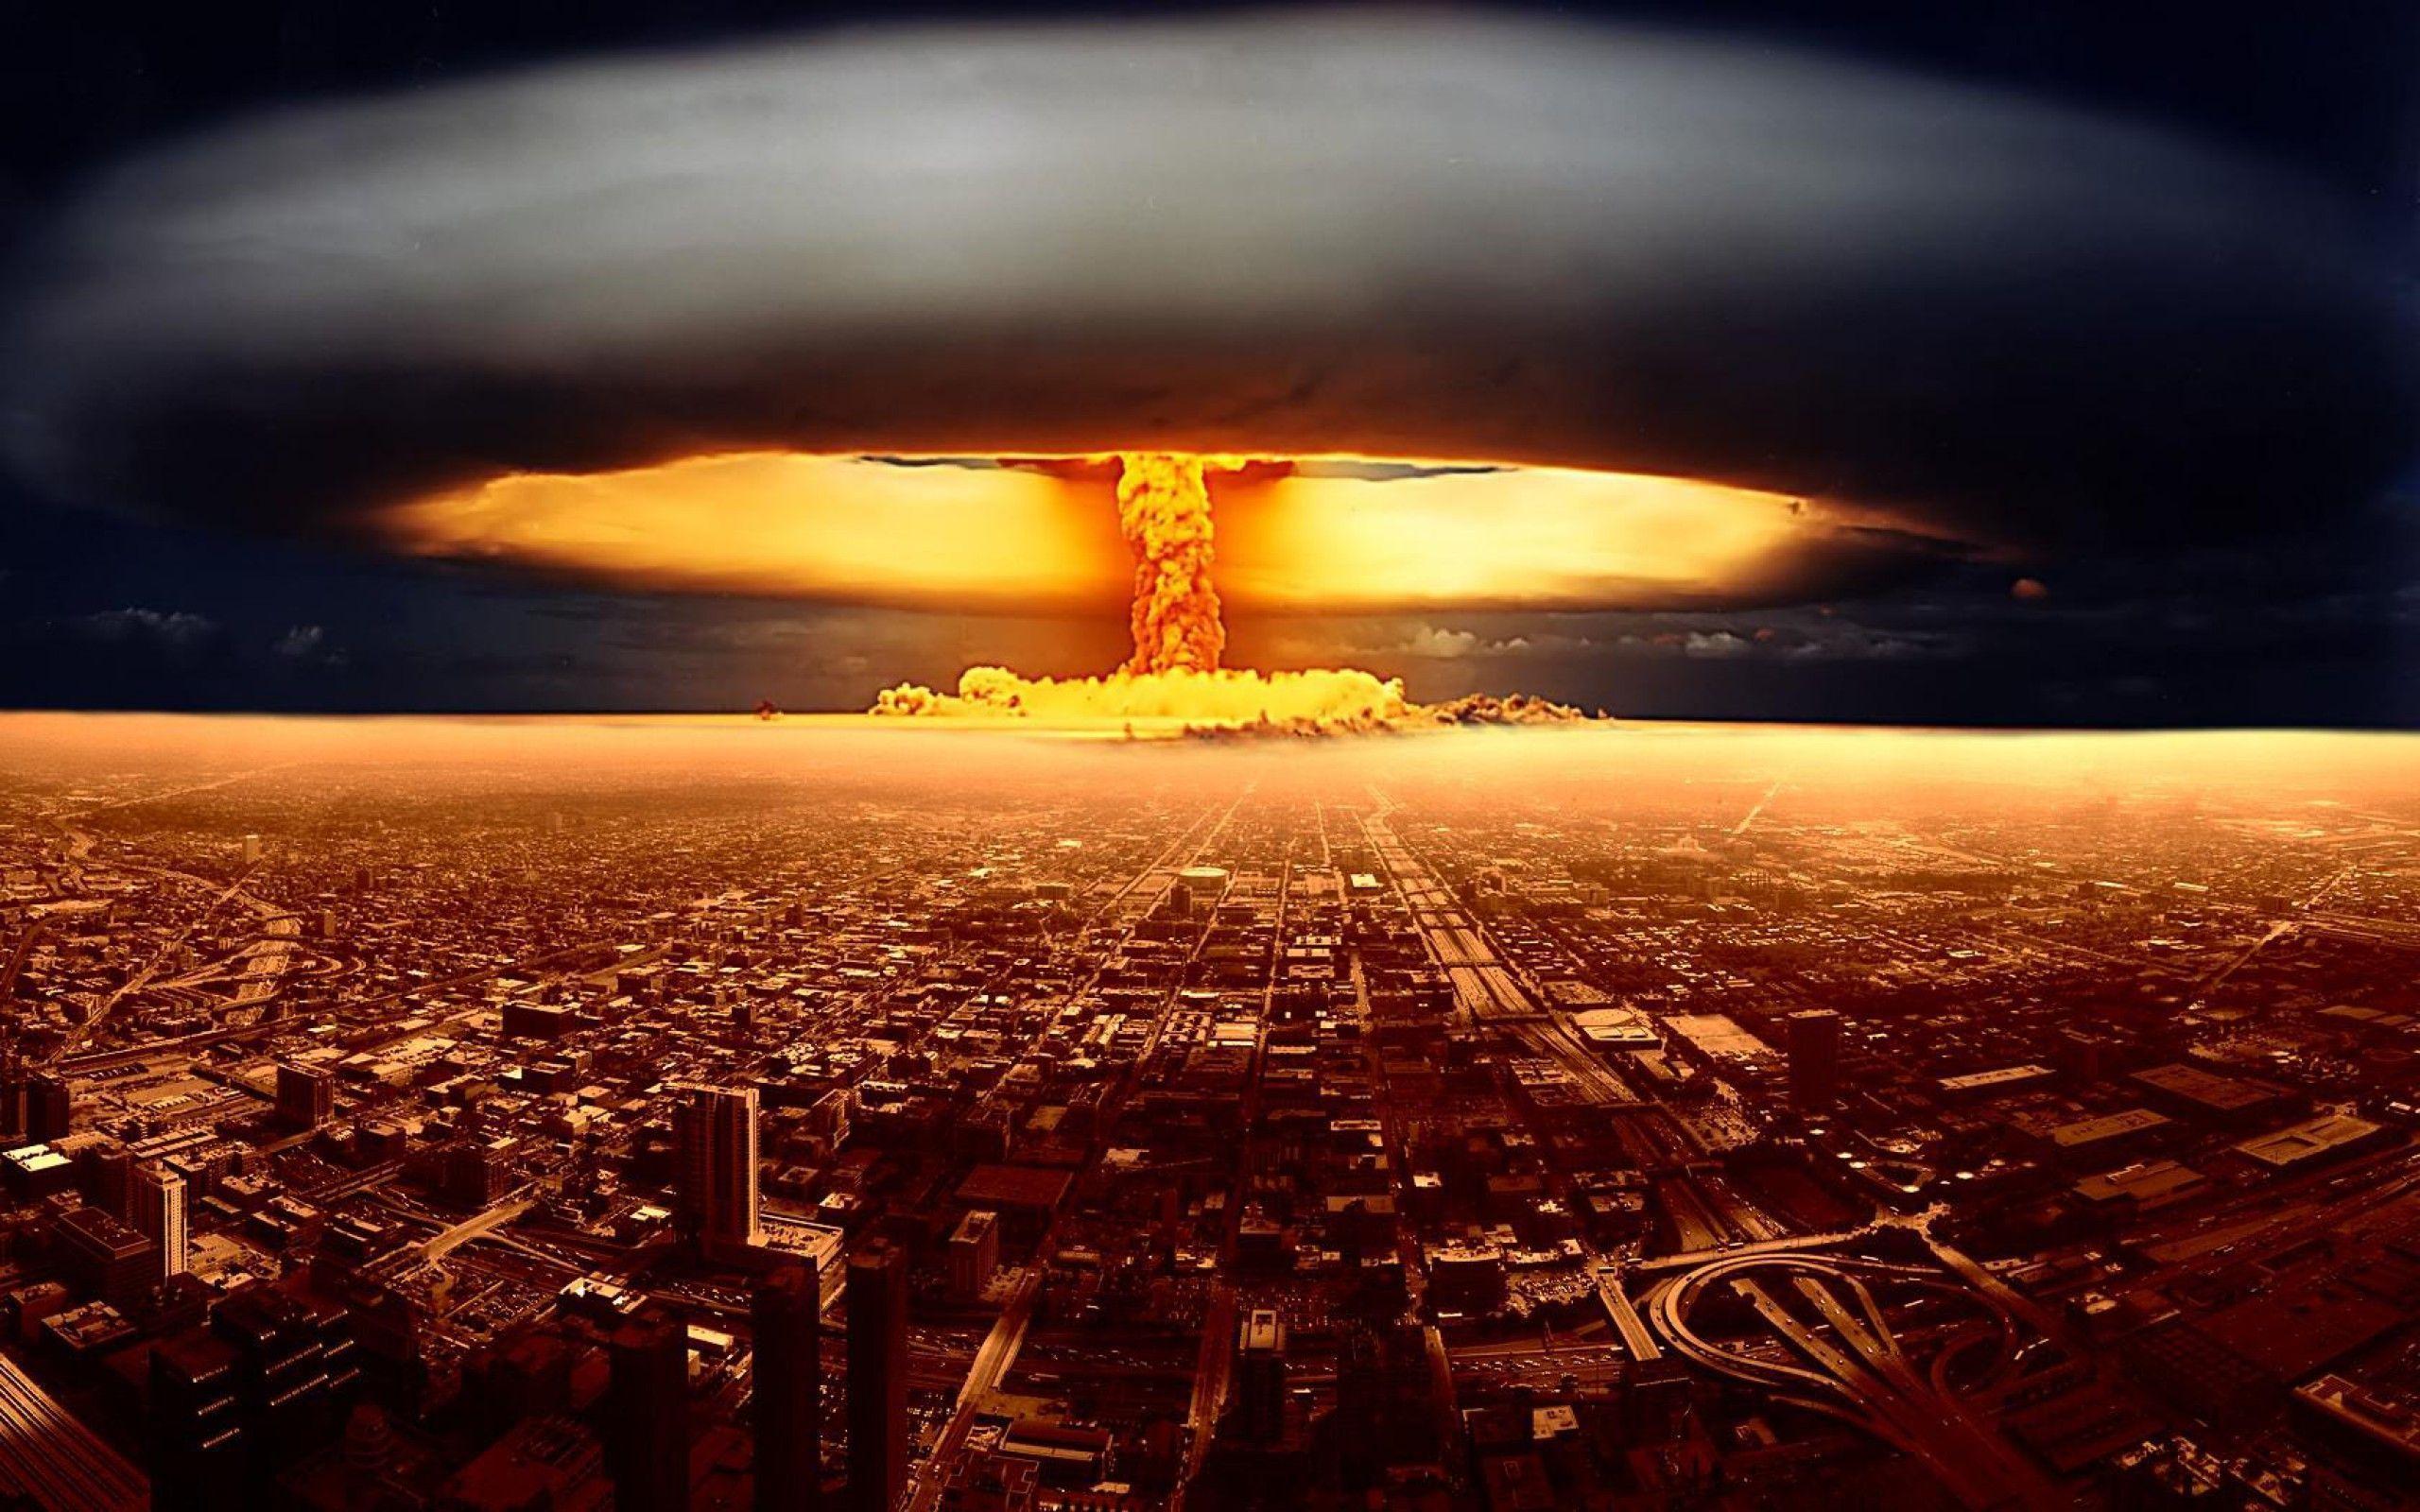 Explosion wallpaper, Nuclear explosion, Nuclear war